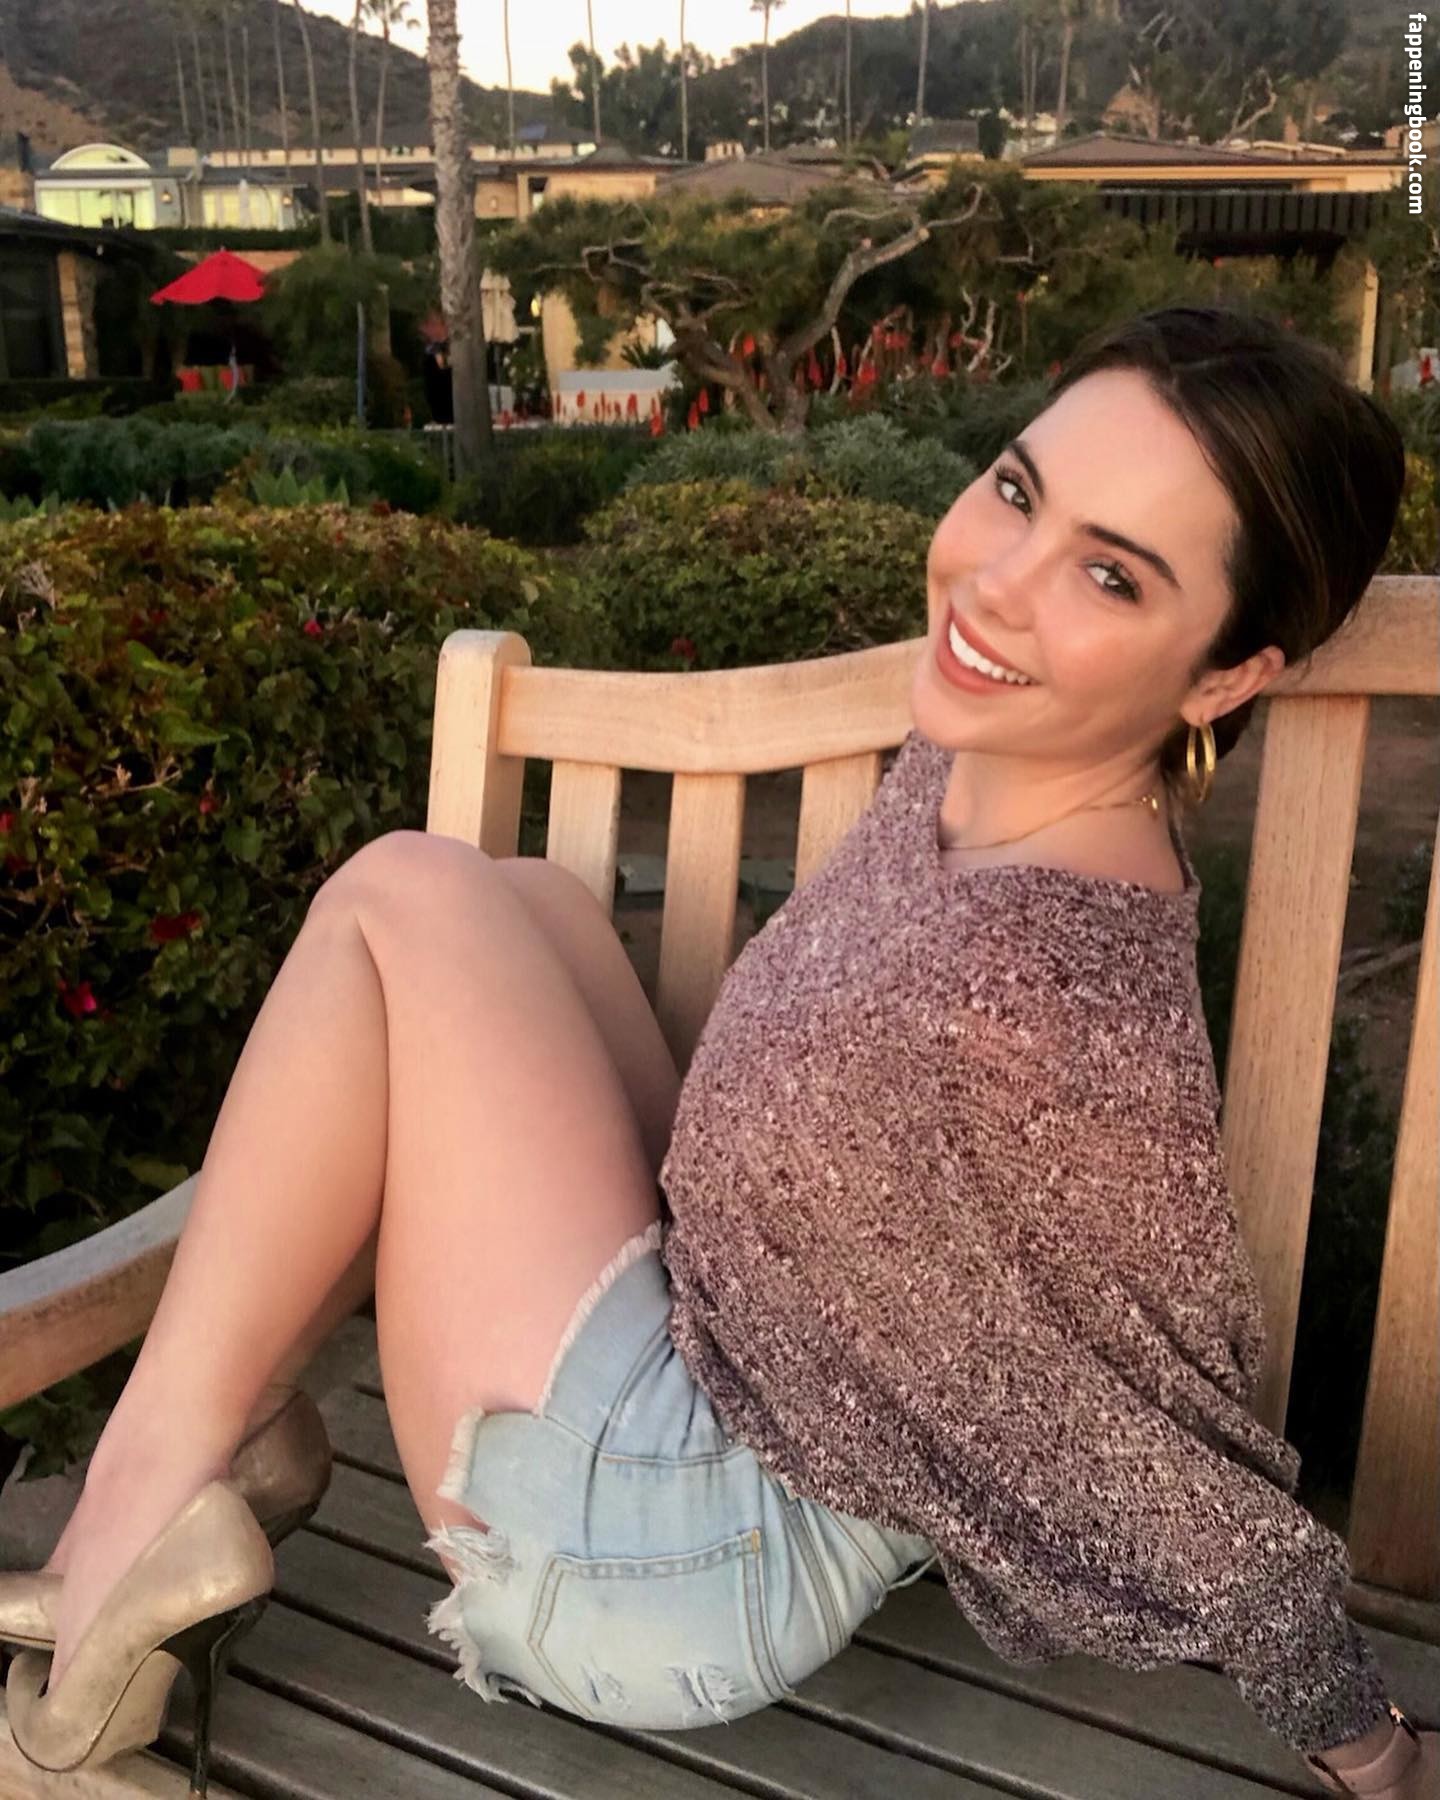 Mckayla Maroney Nude The Fappening Photo Fappeningbook